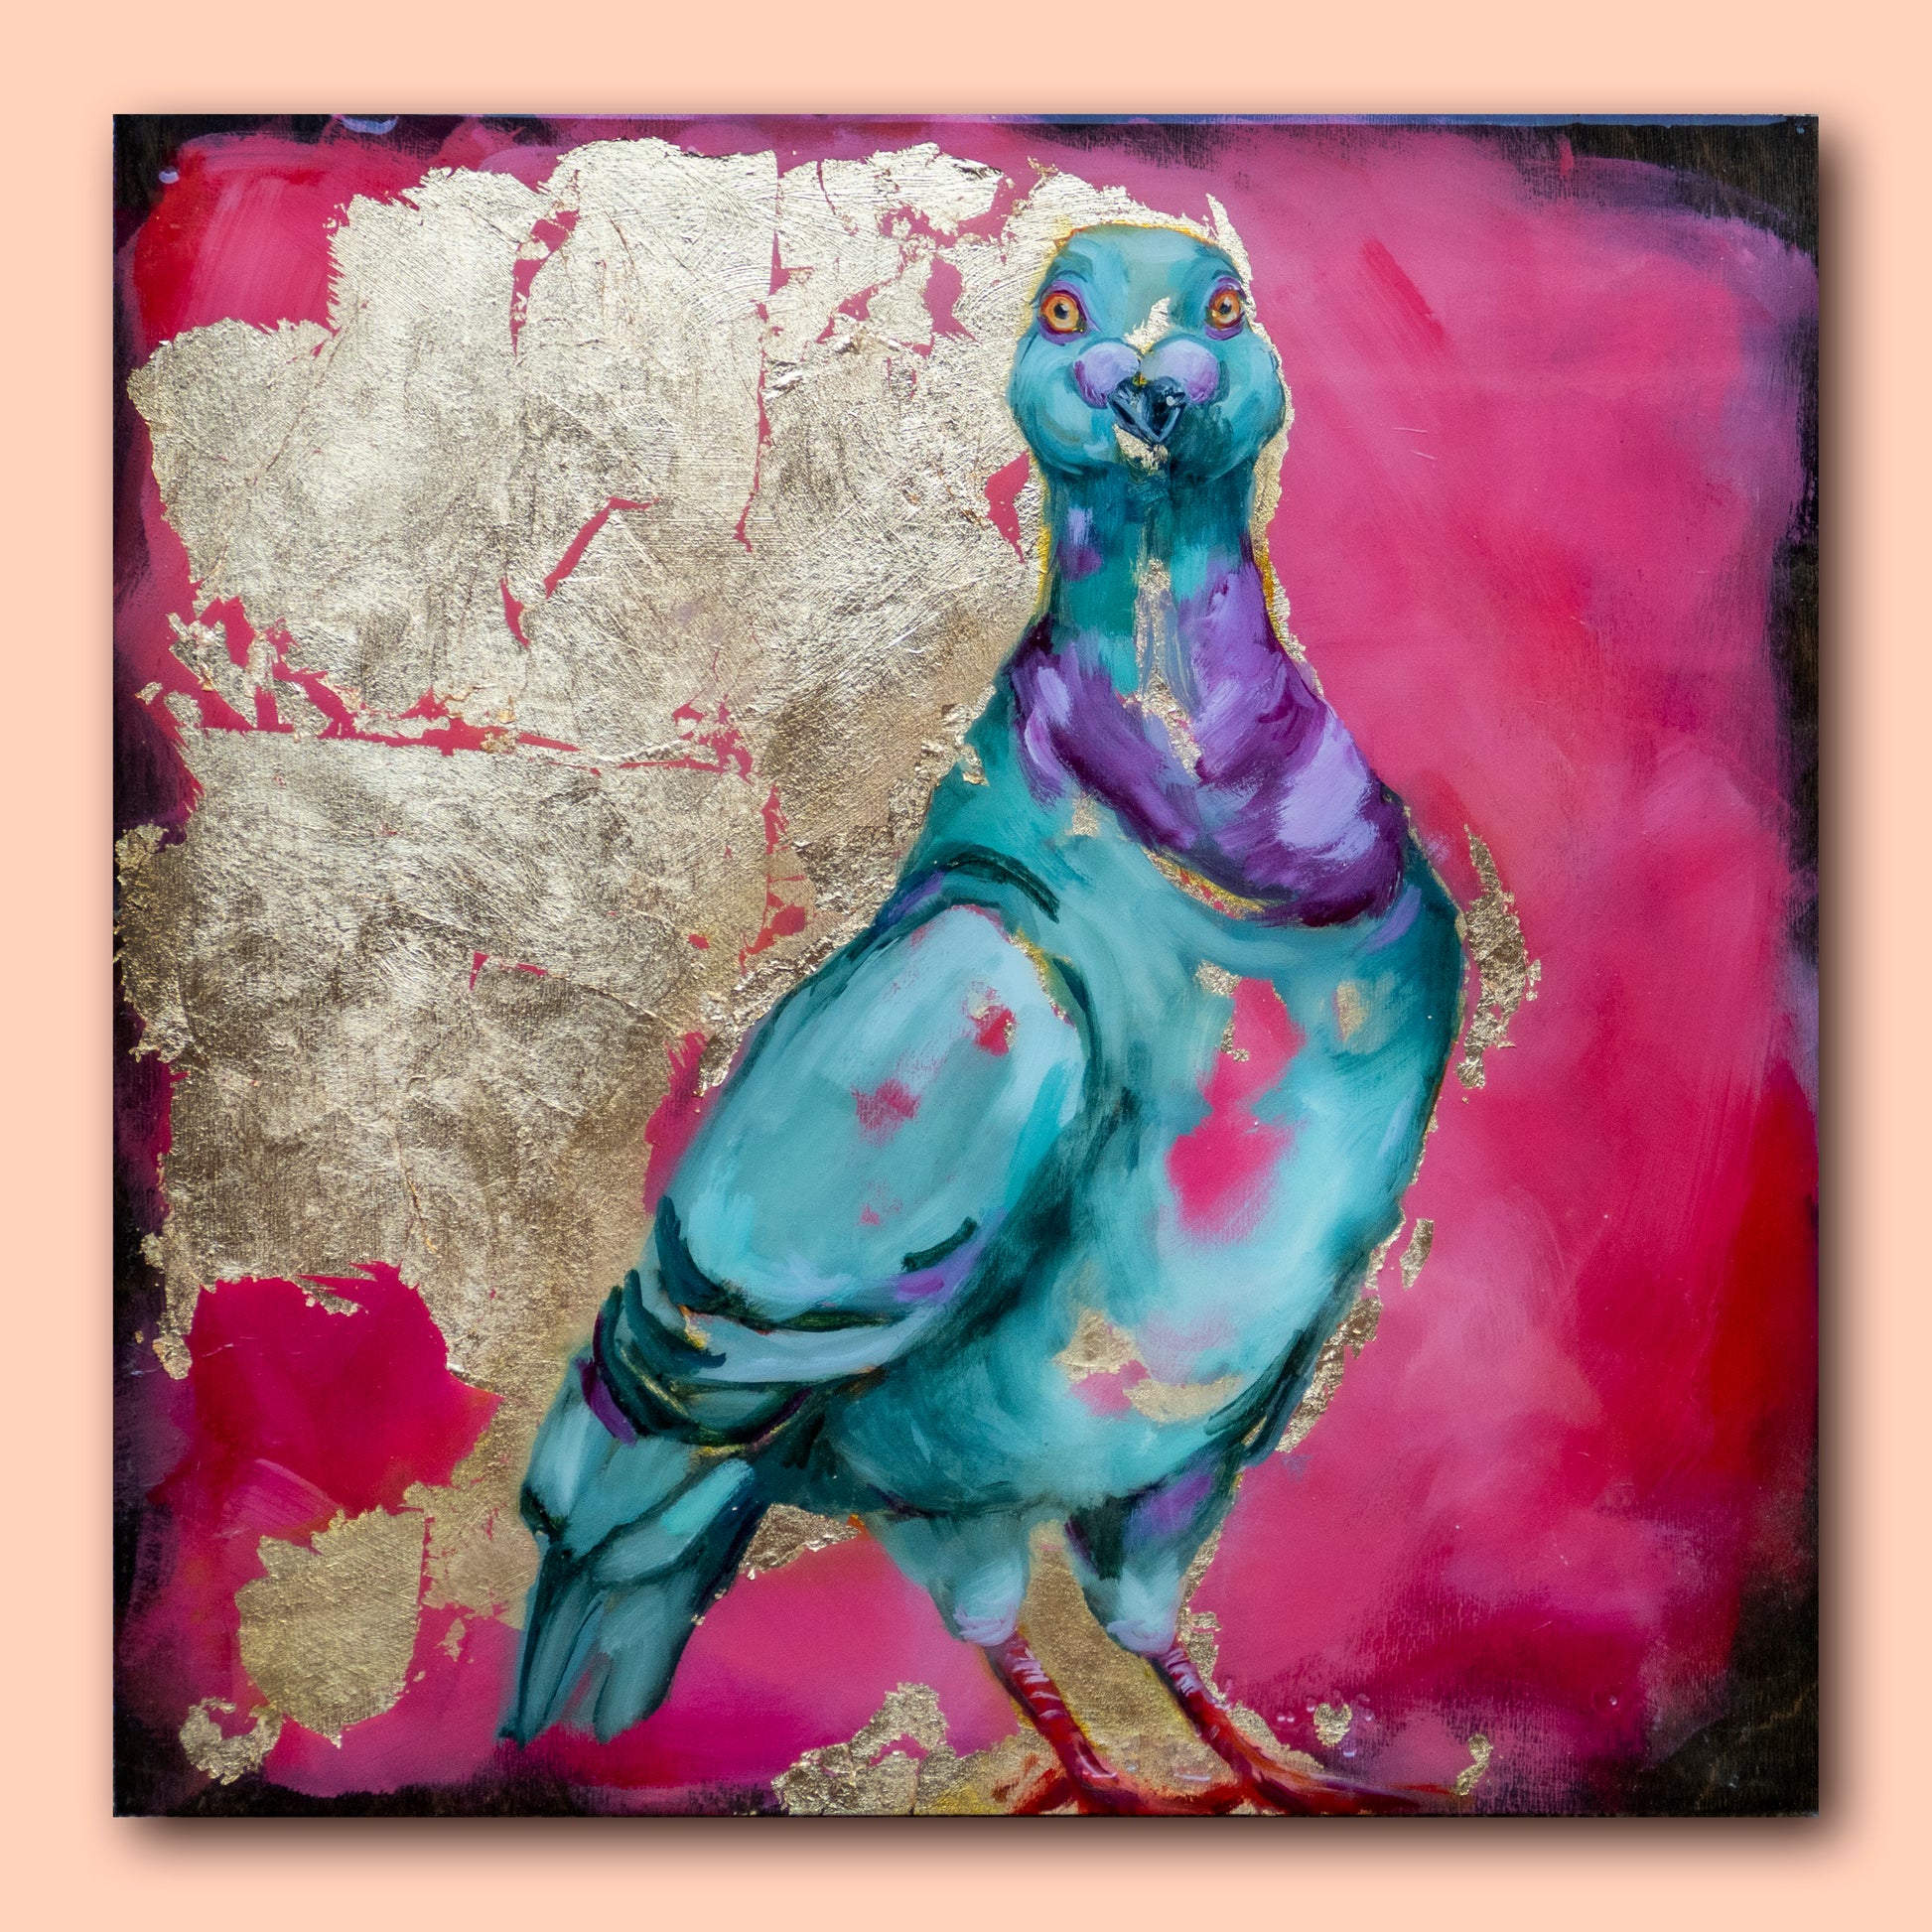 14"x14" painting of Pidgeon using mixed media; acrylic and oil, pencil, and gold leaf with glossy resin finish on surface; artist Shaney Watters